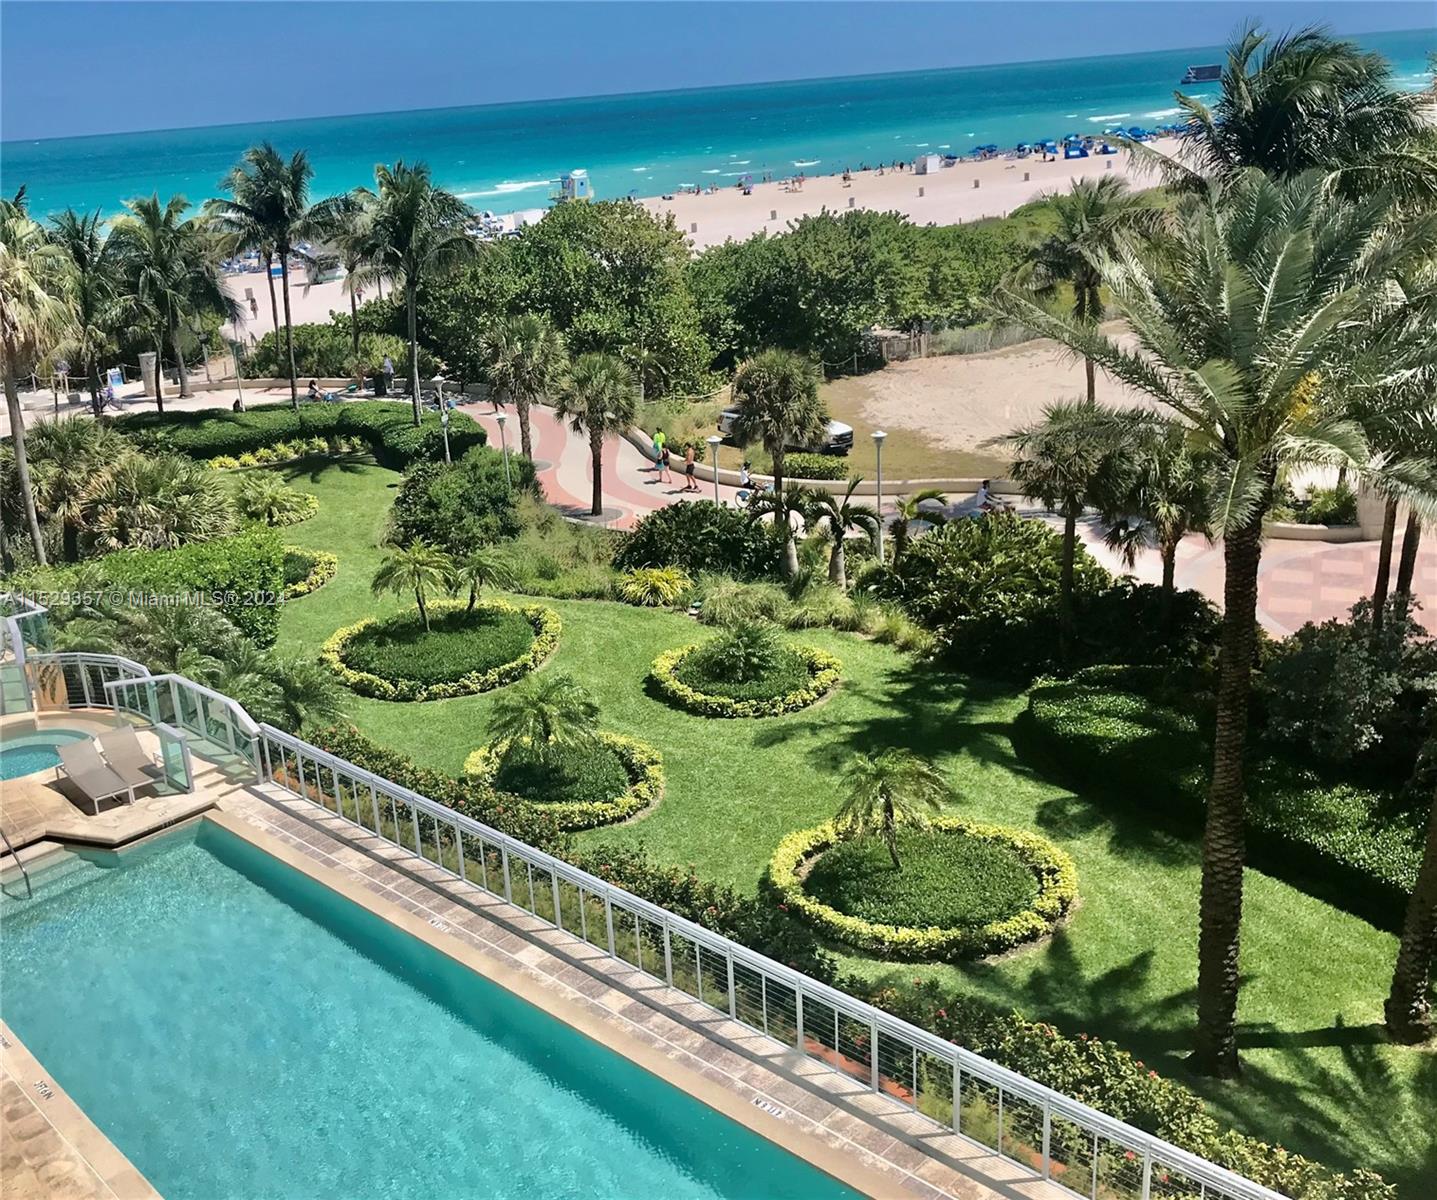 Hidden gem in the heart of South Beach. IL Villaggio is an Ocean front full-service building includes
 beach service, state of the art gym, newly renovated interior and exterior. Guard gate and 24hr security. Walk to many nearby restaurants or lounge at the beach or poolside. The unit has stunning views with an enormous balcony hovering over palm trees